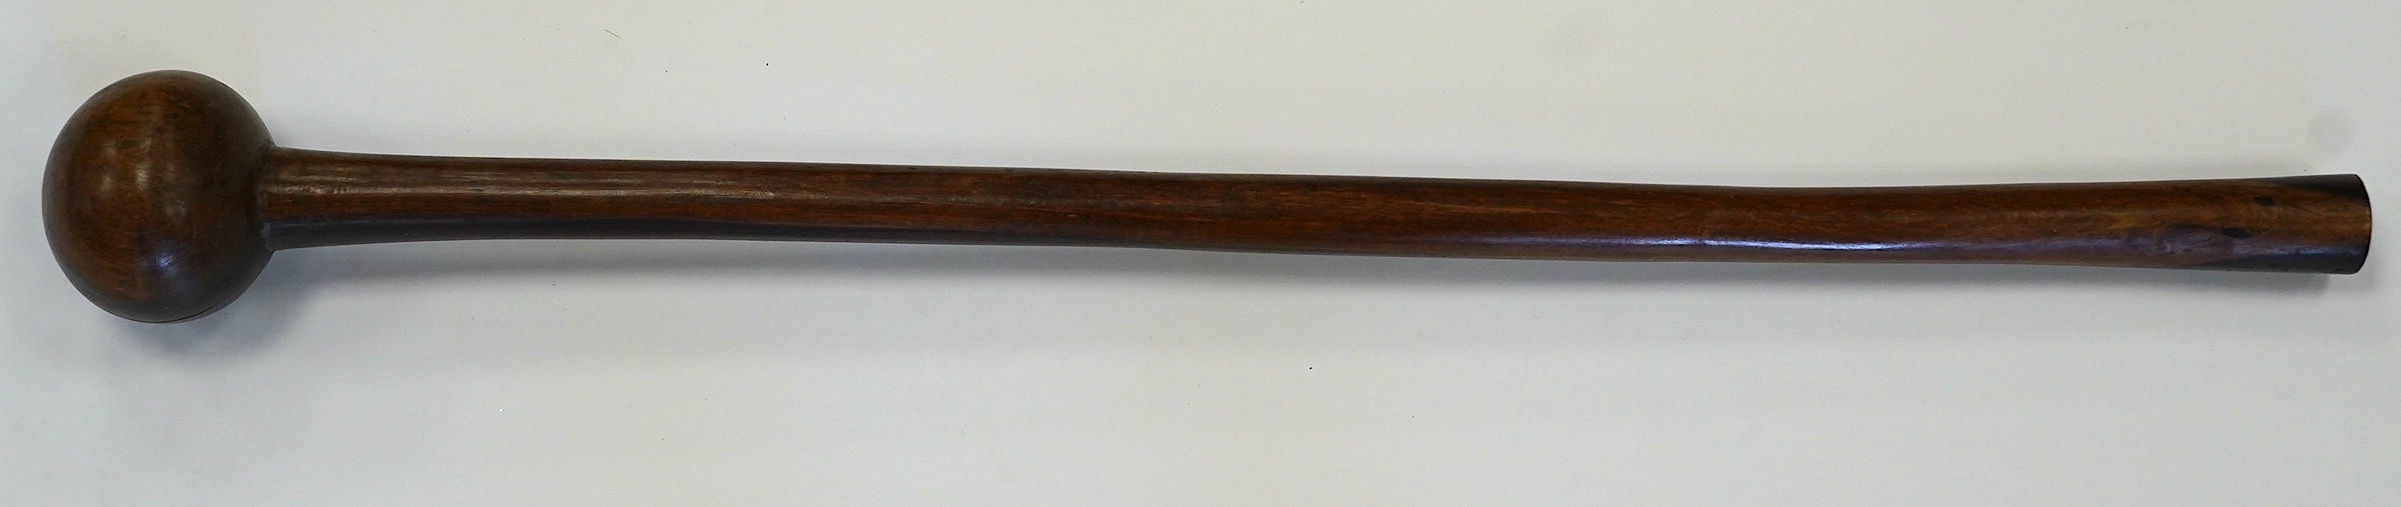 An African ebony Knobkerrie, 70cm. Condition - good.